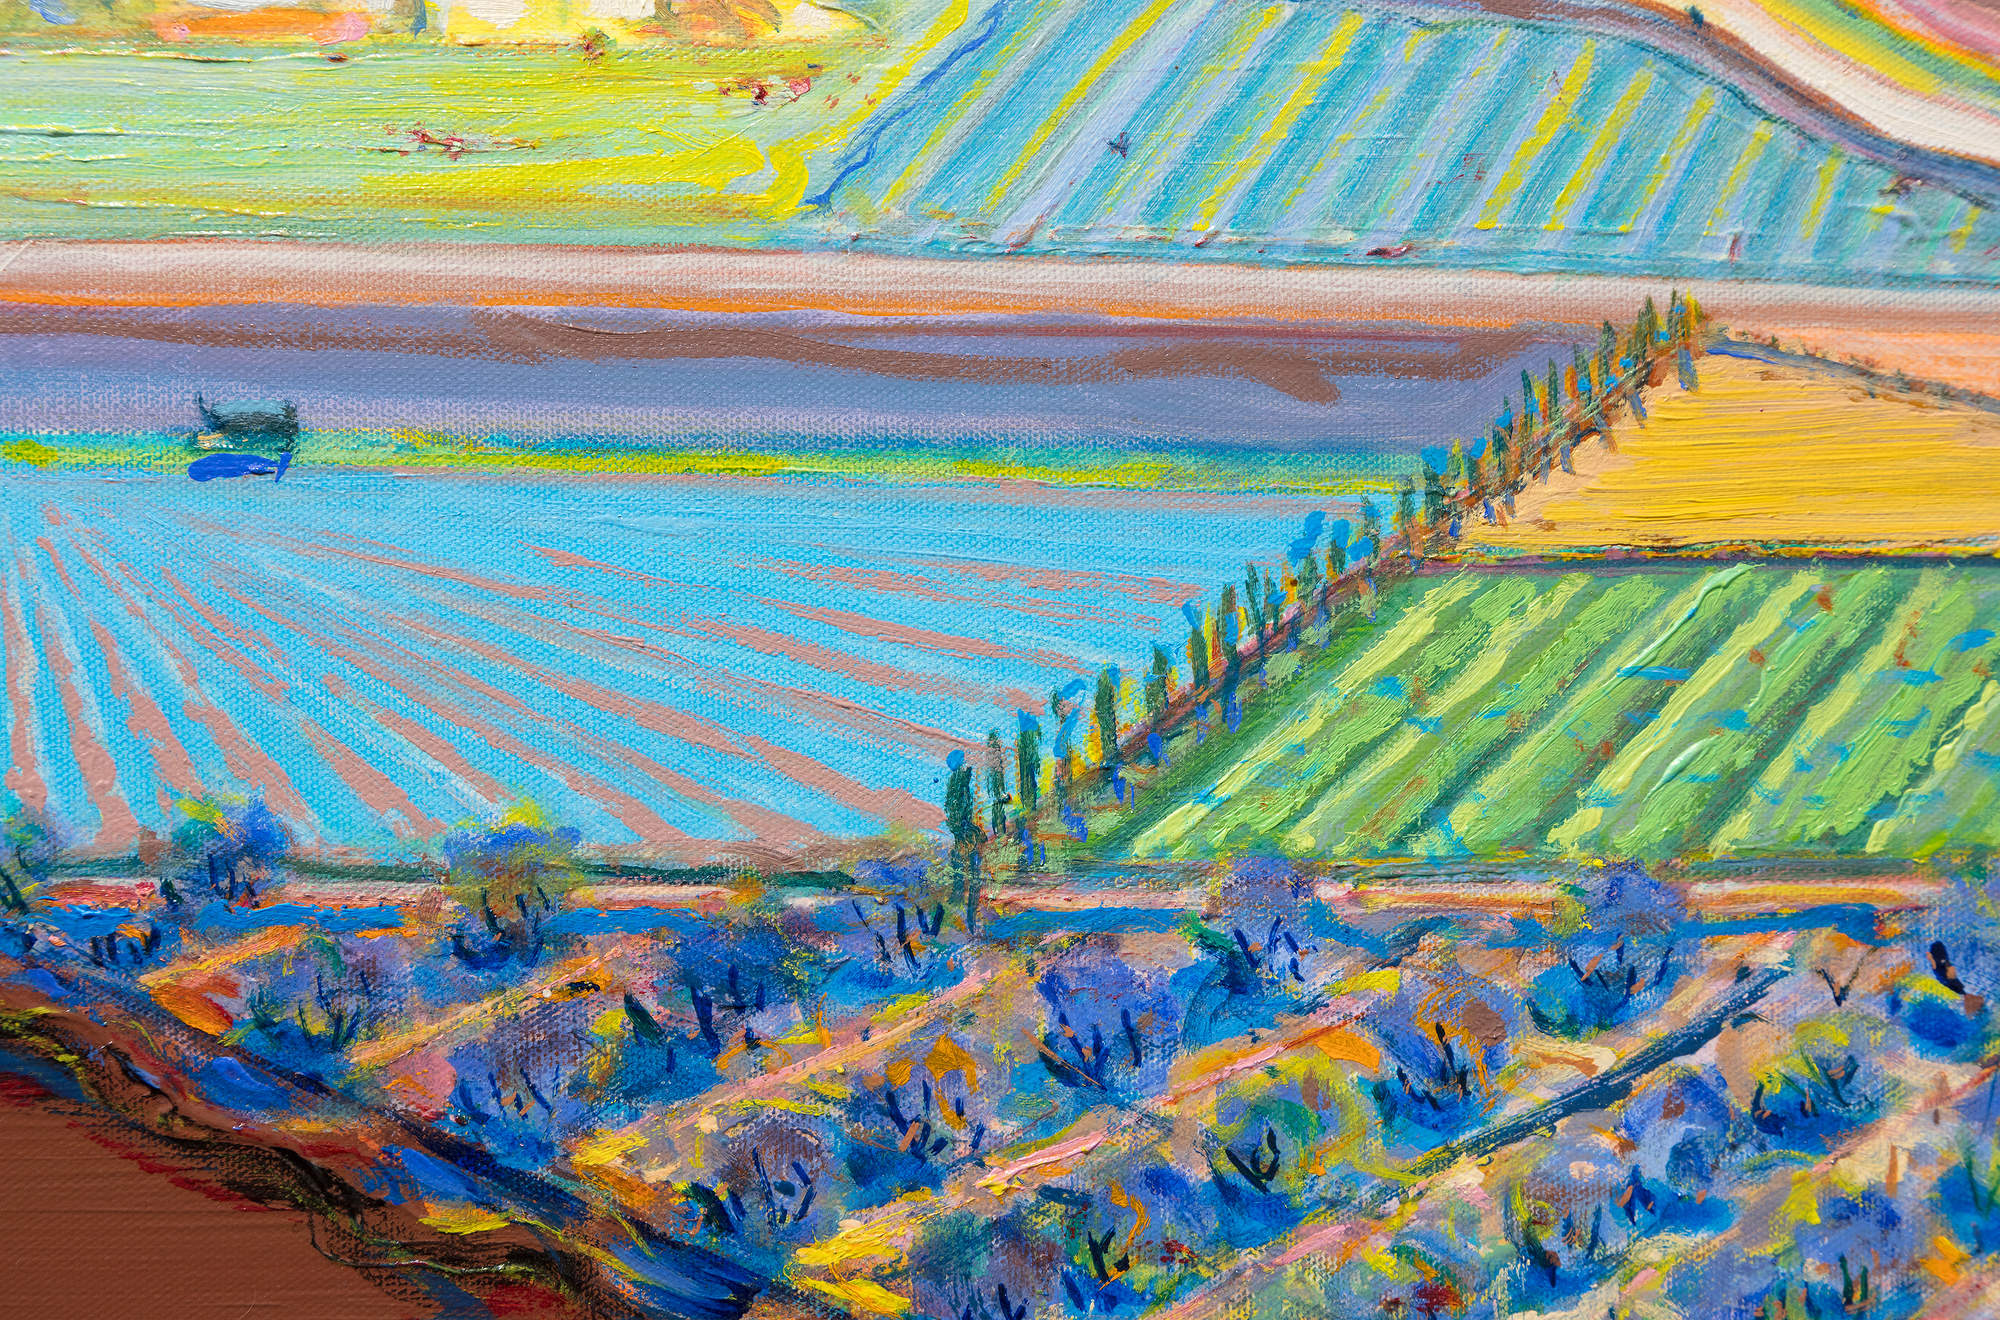 When forty rural Sacramento Delta landscapes by Wayne Thiebaud were unveiled at a San Francisco gallery opening in November 1997, attendees were amazed by paintings they never anticipated. This new frontier betrayed neither Thiebaud’s mastery of confectionary-shop colors nor his impeccable eye for formal relationships. Rather, his admirers were shocked to learn that all but seven of these forty interpretations had been completed in just two years. As his son Paul recalled, “the refinements of my father’s artistic process were ever changing in a chameleon-like frenzy.” The new direction had proved an exhilarating experience, each painting an affirmation of Wayne Thiebaud’s impassioned response to the fields and levees of the local environment he dearly loved. <br><br>Viewed from the perspective of a bird or a plane, The Riverhouse is an agrarian tapestry conceived with a kaleidoscopic range of shapes and simple forms; fields striped with furrows or striated fans, deliriously colored parallelograms and trapezoids, an orchard garnished pizza-shaped wedge, and a boldly limned river, the lifeline of a thirsty California central valley largely dependent upon transported water.<br><br>The Riverhouse is a painting that ‘moves’ between seamlessly shifting planes of aerial mapping that recalls Richard Diebenkorn’s stroke of insight when he took his first commercial flight the spring of 1951, and those partitions engaging a more standard vanishing point perspective. Thiebaud explained his process as “orchestrating with as much variety and tempo as I can.” Brightly lit with a fauve-like intensity, The Riverhouse is a heady concoction of vibrant pigment and rich impasto; one that recalls his indebtedness to Pierre Bonnard whose color Thiebaud referred to as “a bucket full of hot coals and ice cubes.” Among his many other influences, the insertion of objects — often tiny — that defy a rational sense of scale that reflects his interest in Chinese landscape painting.<br><br>As always, his mastery as a painter recalls his titular pies and cakes with their bewitching rainbow-like halos and side-by-side colors of equal intensity but differing in hues to create the vibratory effect of an aura, what Thiebaud explained “denotes an attempt to develop as much energy and light and visual power as you can.” Thiebaud’s Sacramento Delta landscapes are an integral and important part of his oeuvre. Paintings such as The Riverhouse rival the best abstract art of the twentieth century. His good friend, Willem de Kooning thought so, too.